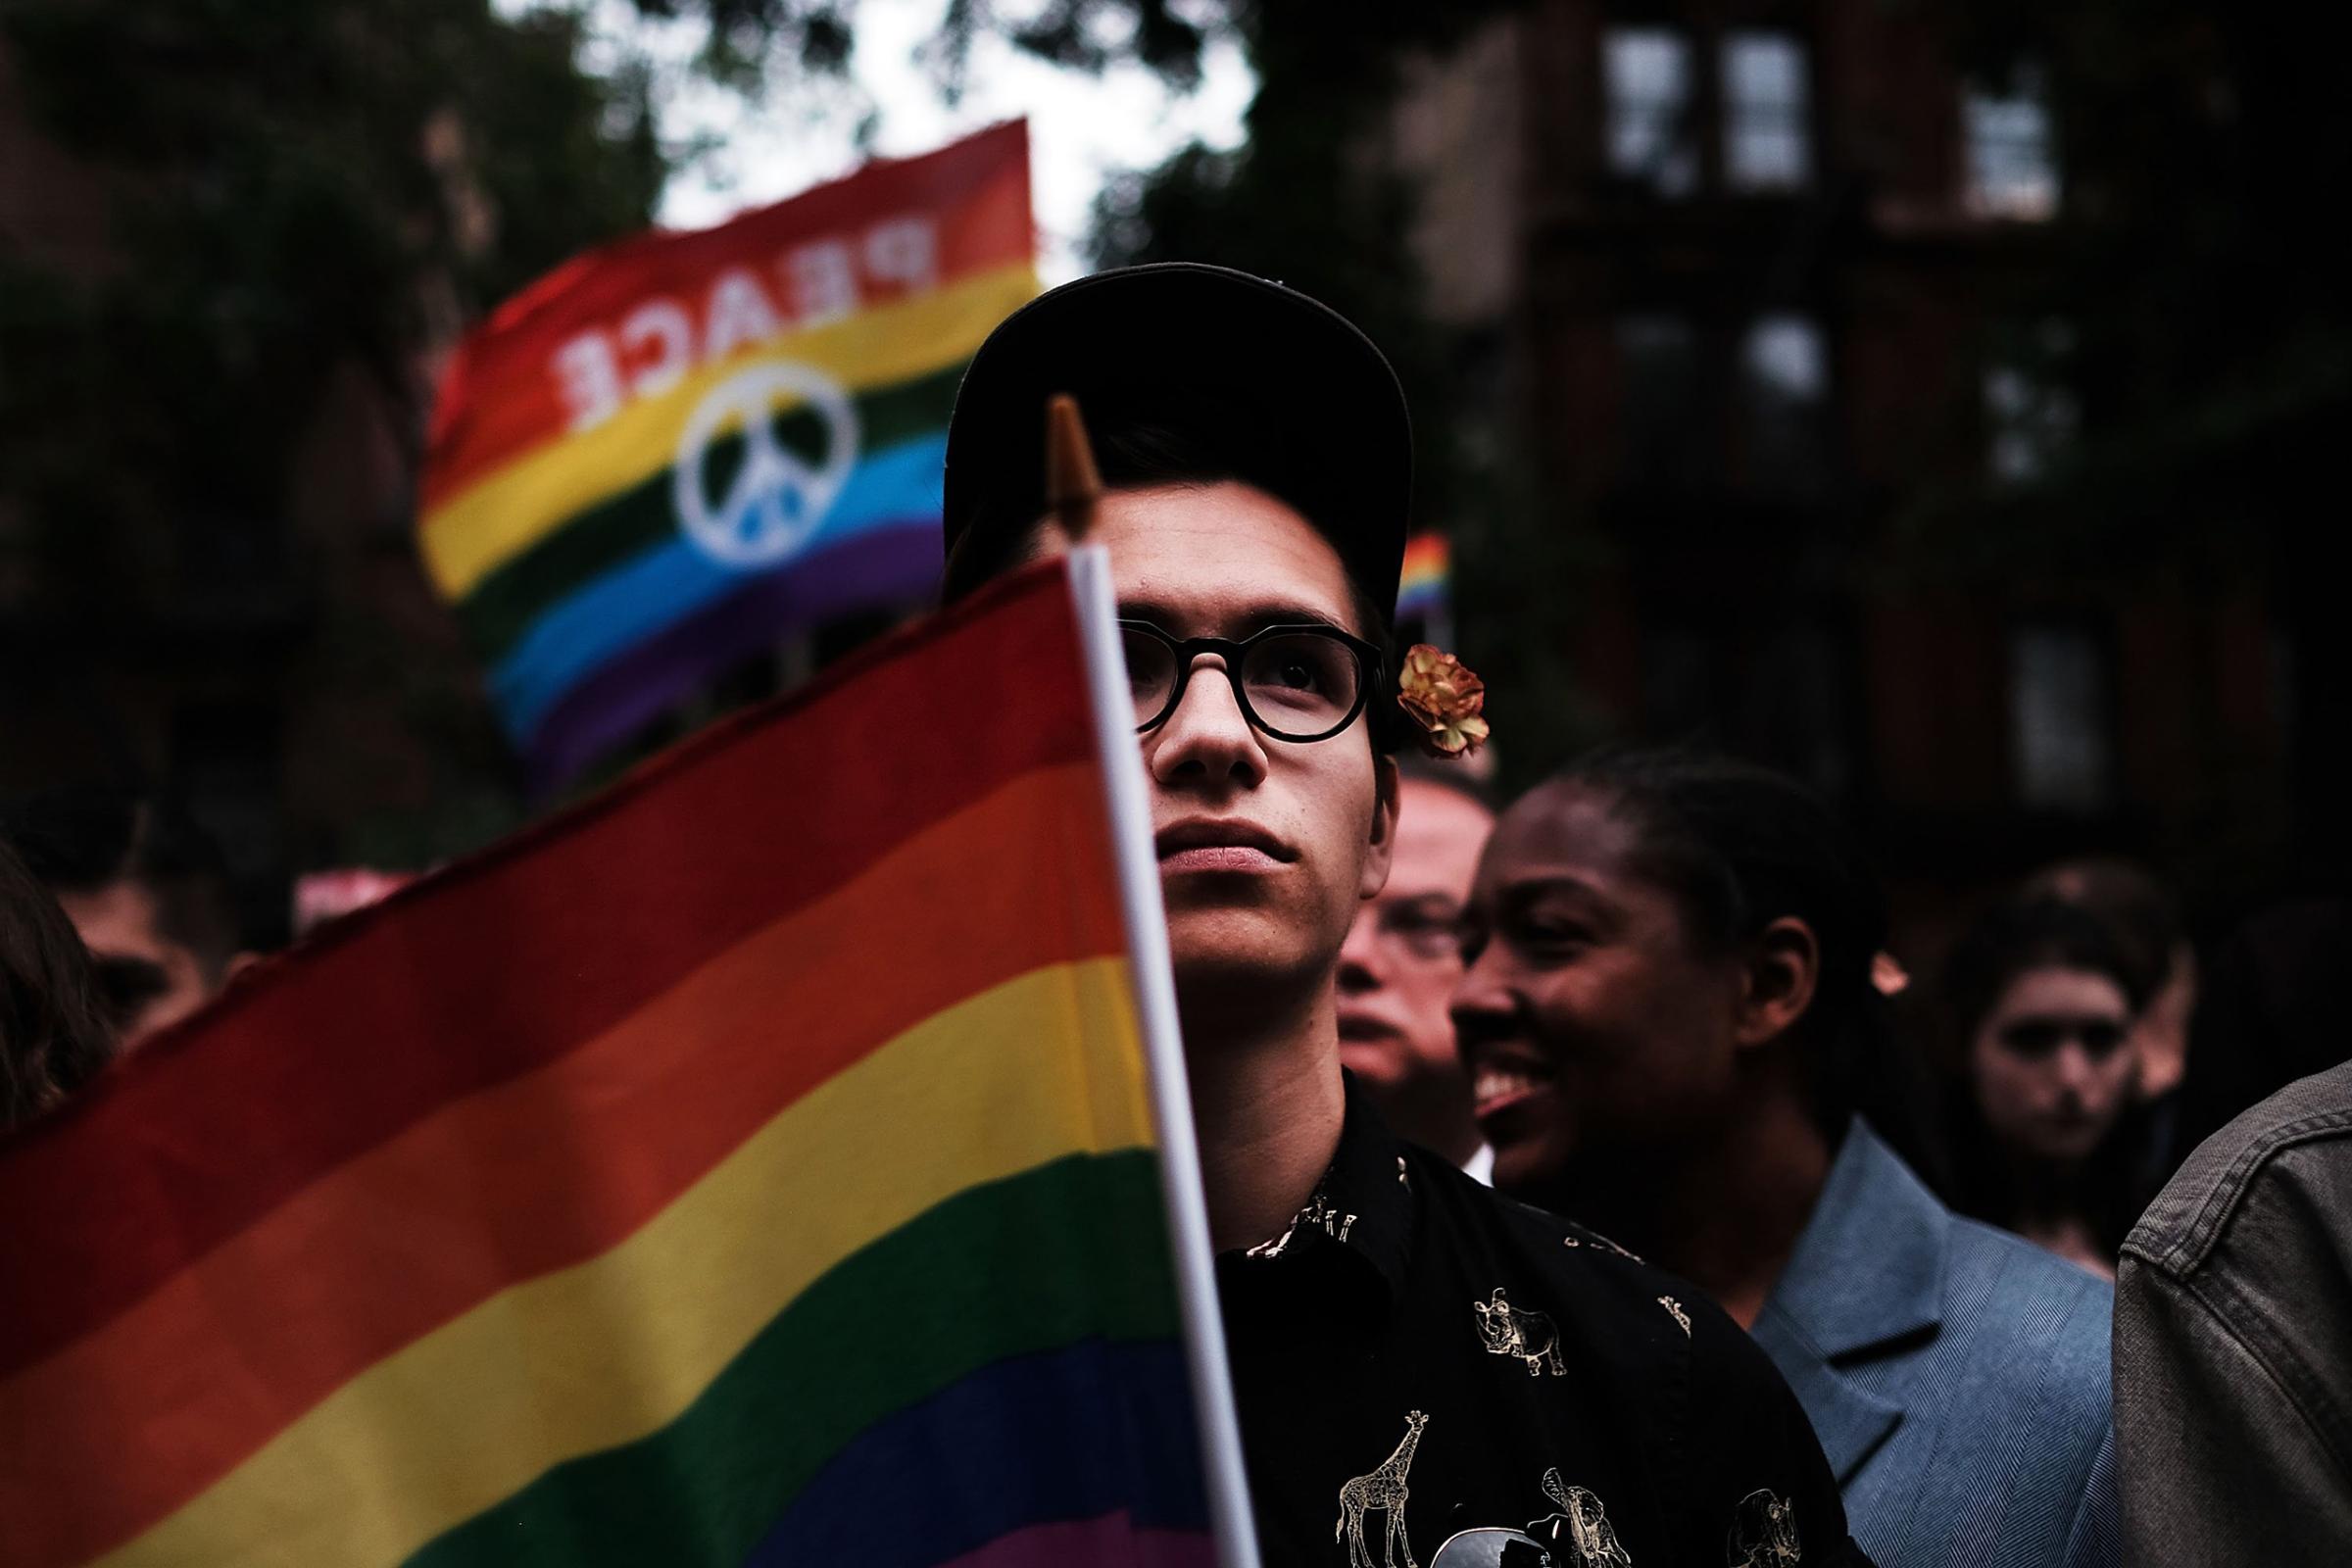 Hundreds of people listen to speakers at a memorial gathering for those killed in Orlando in front of the iconic New York City gay and lesbian bar The Stonewall Inn on June 13, 2016.